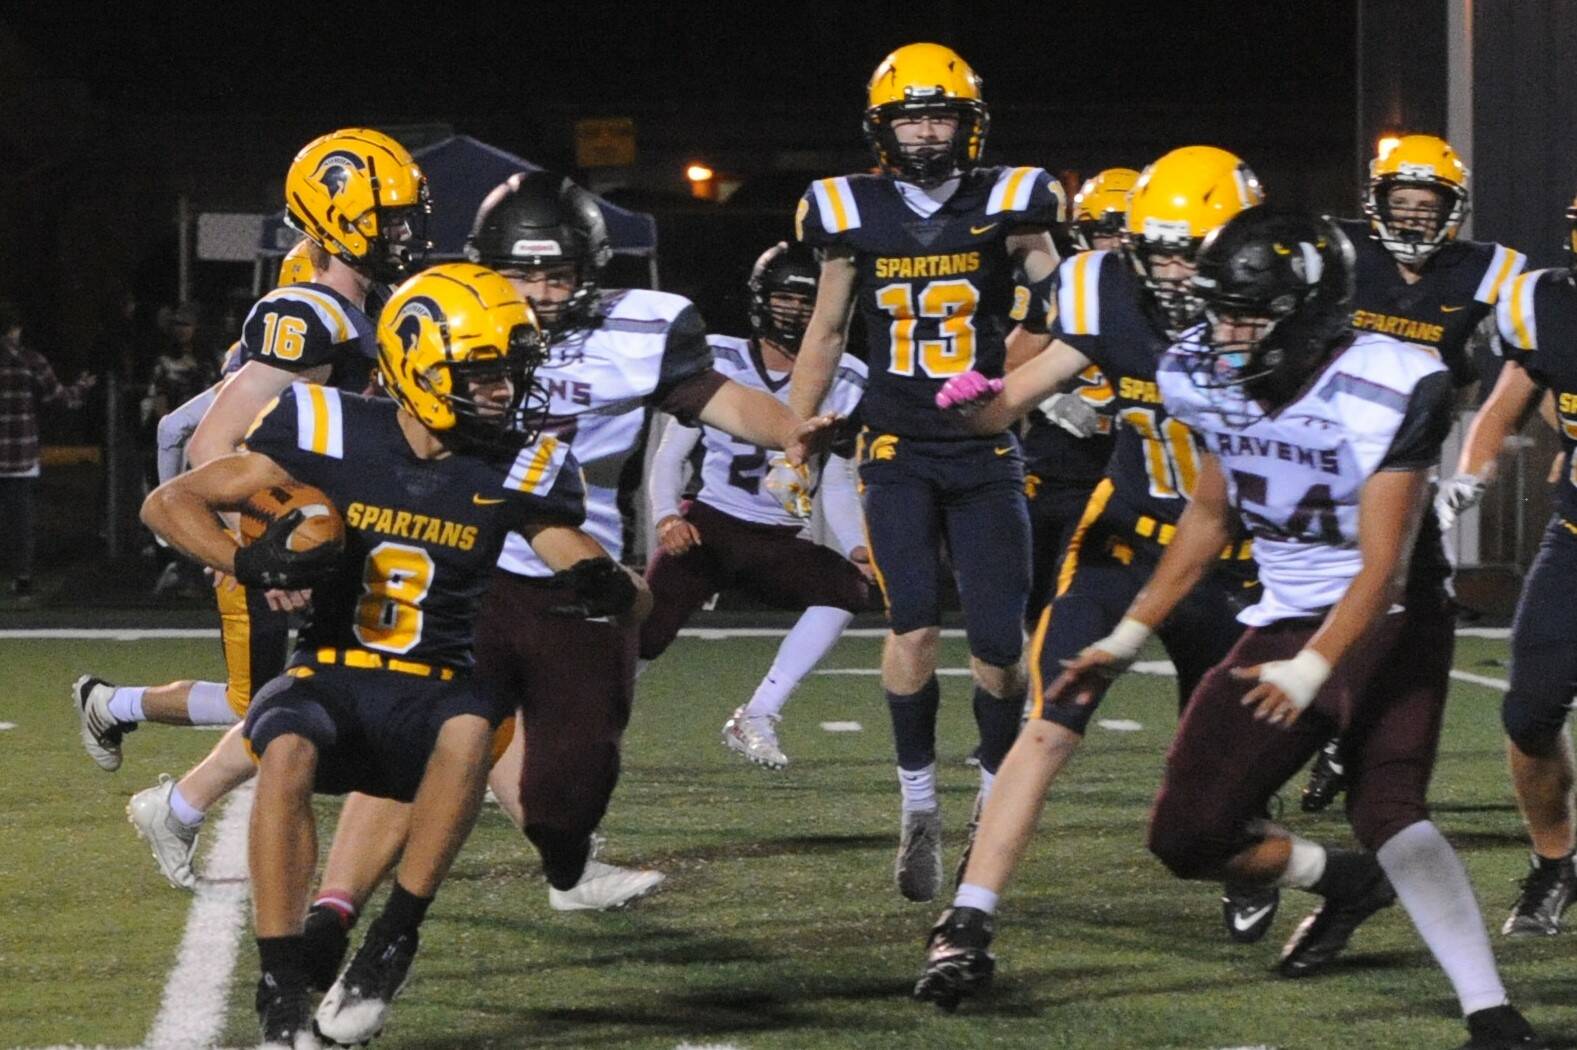 Forks’ Camryn Kennedy (8) looks for running room Friday night in Forks against the Ravens. Also in on the action are Gunner Rogers (16) Ryan Rancourt (13) and Landen Olson (10). Photo by Lonnie Archibald